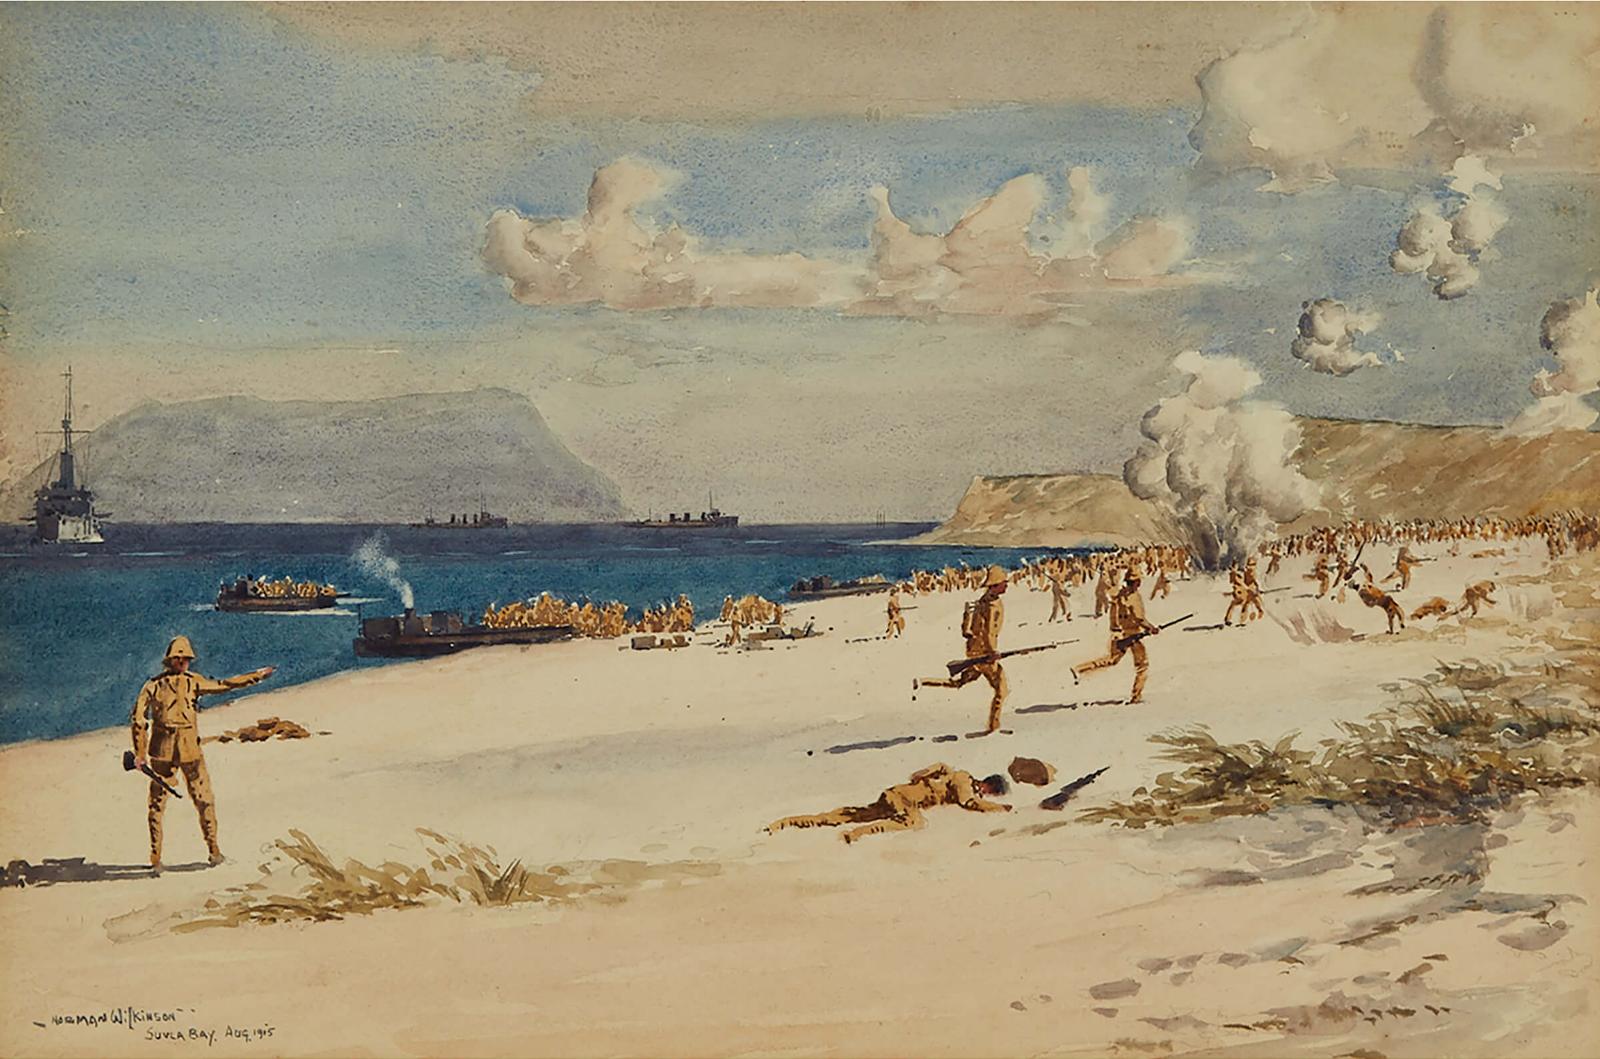 Norman Wilkinson (1878-1971) - Wwi Troops At Suvla Bay, August 1915